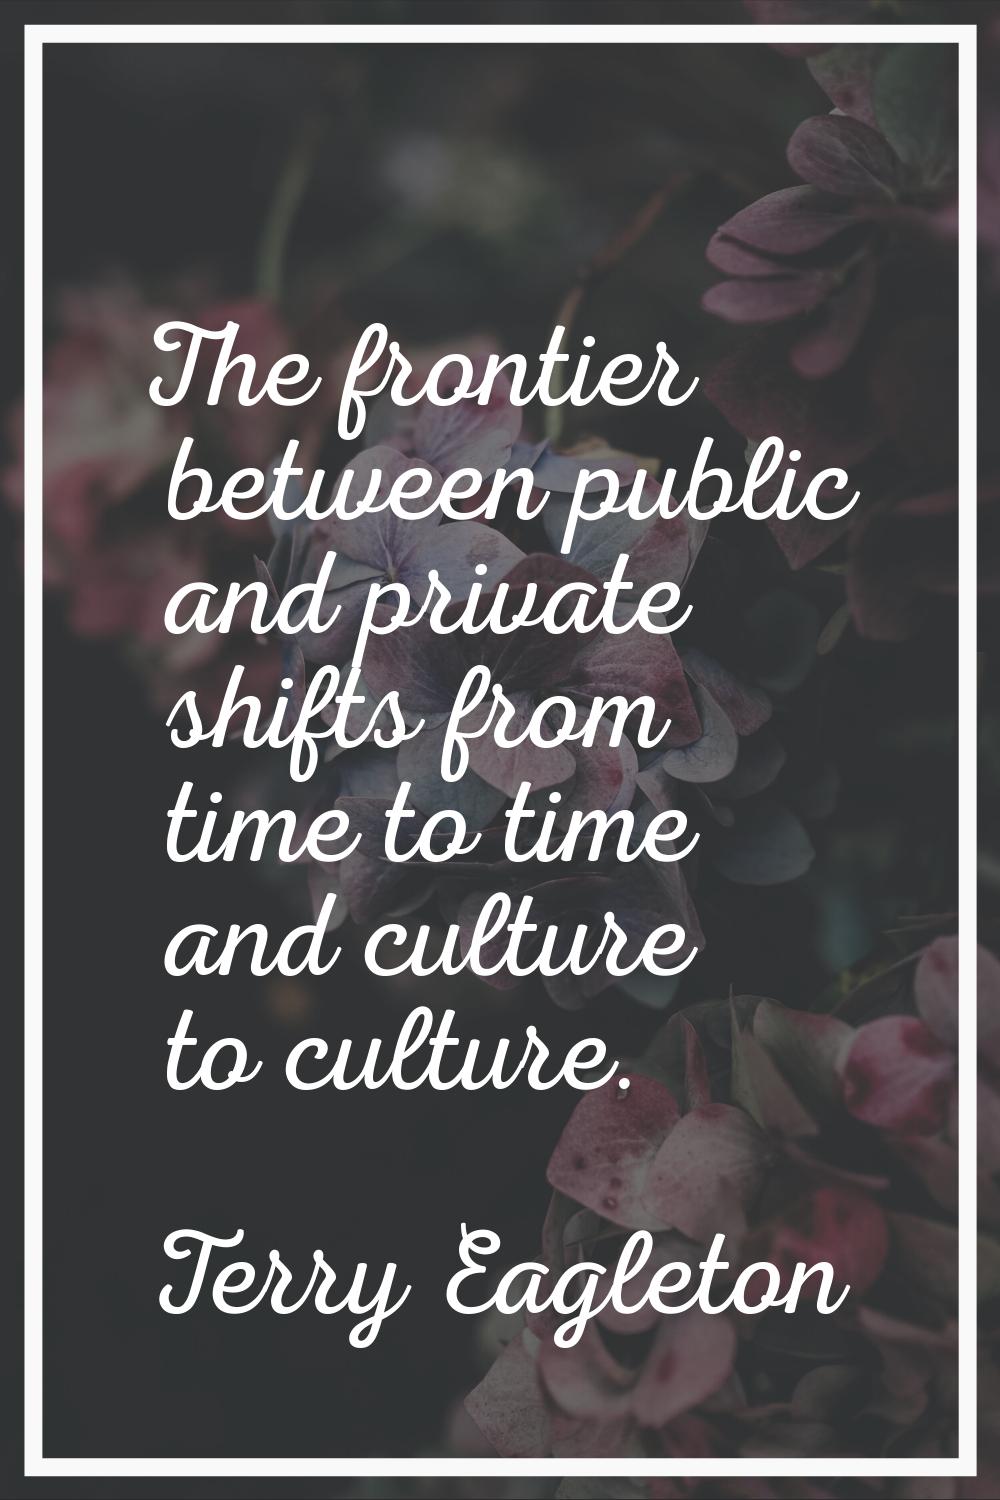 The frontier between public and private shifts from time to time and culture to culture.